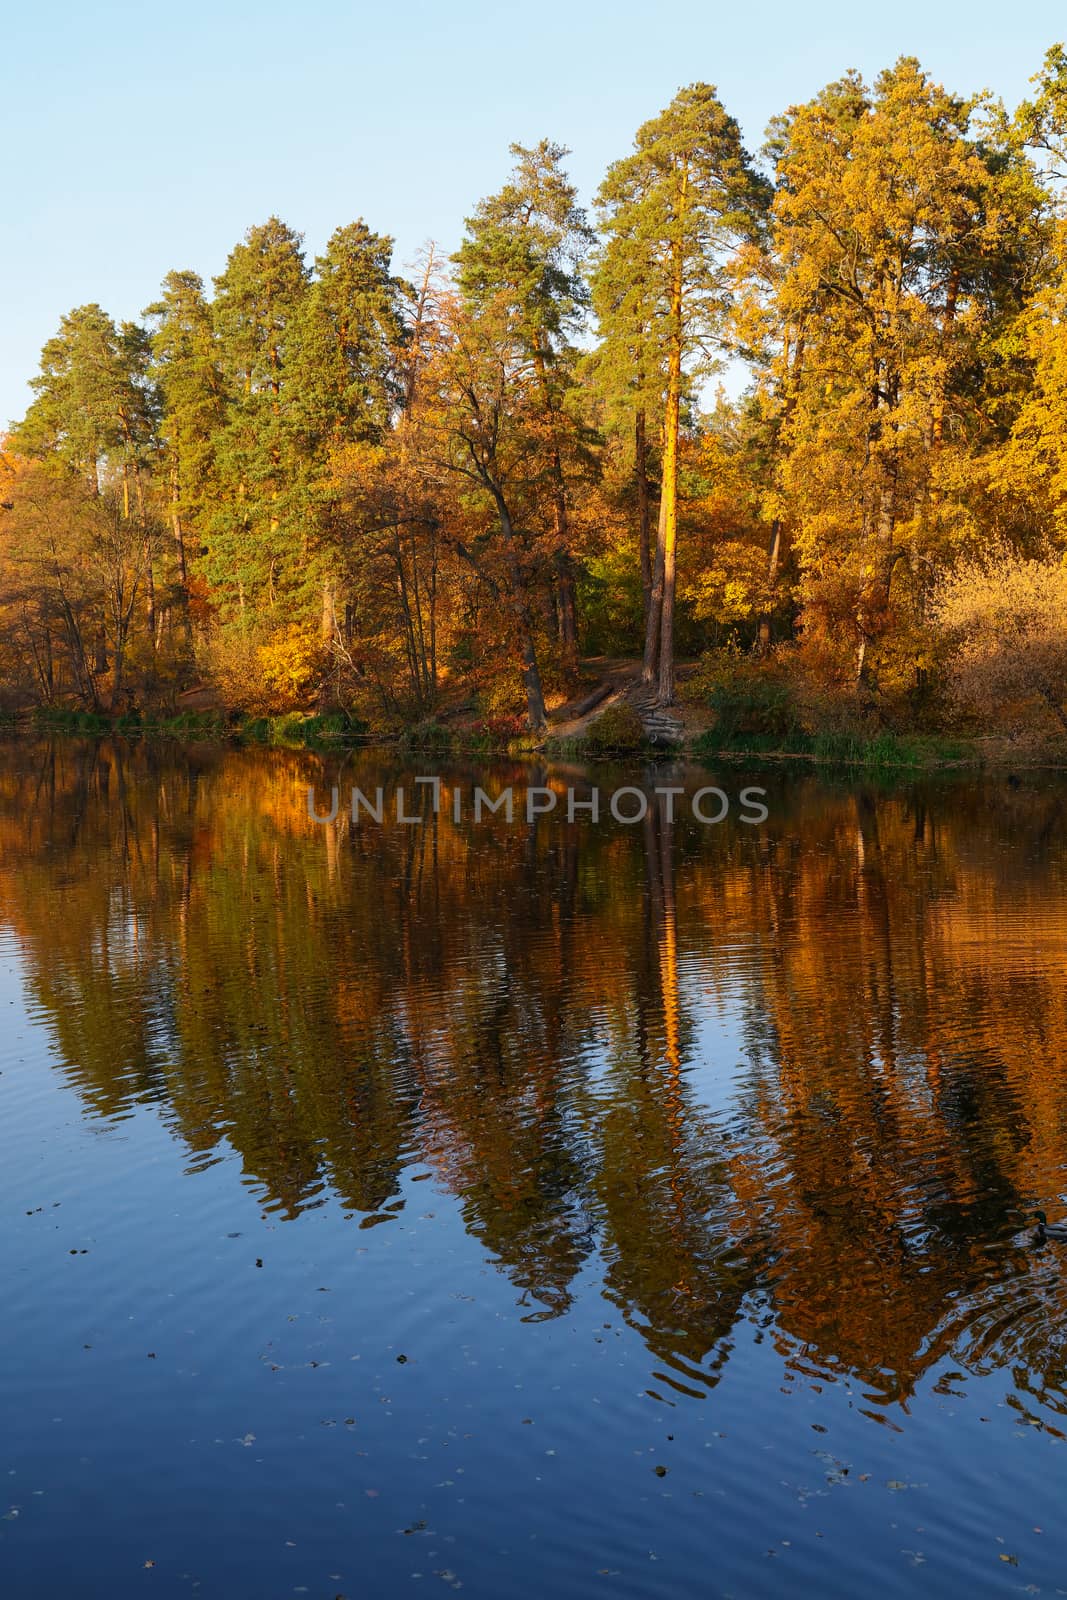 Orange and yellow autumn trees under blue sky with reflection in calm lake water surface, low angle view